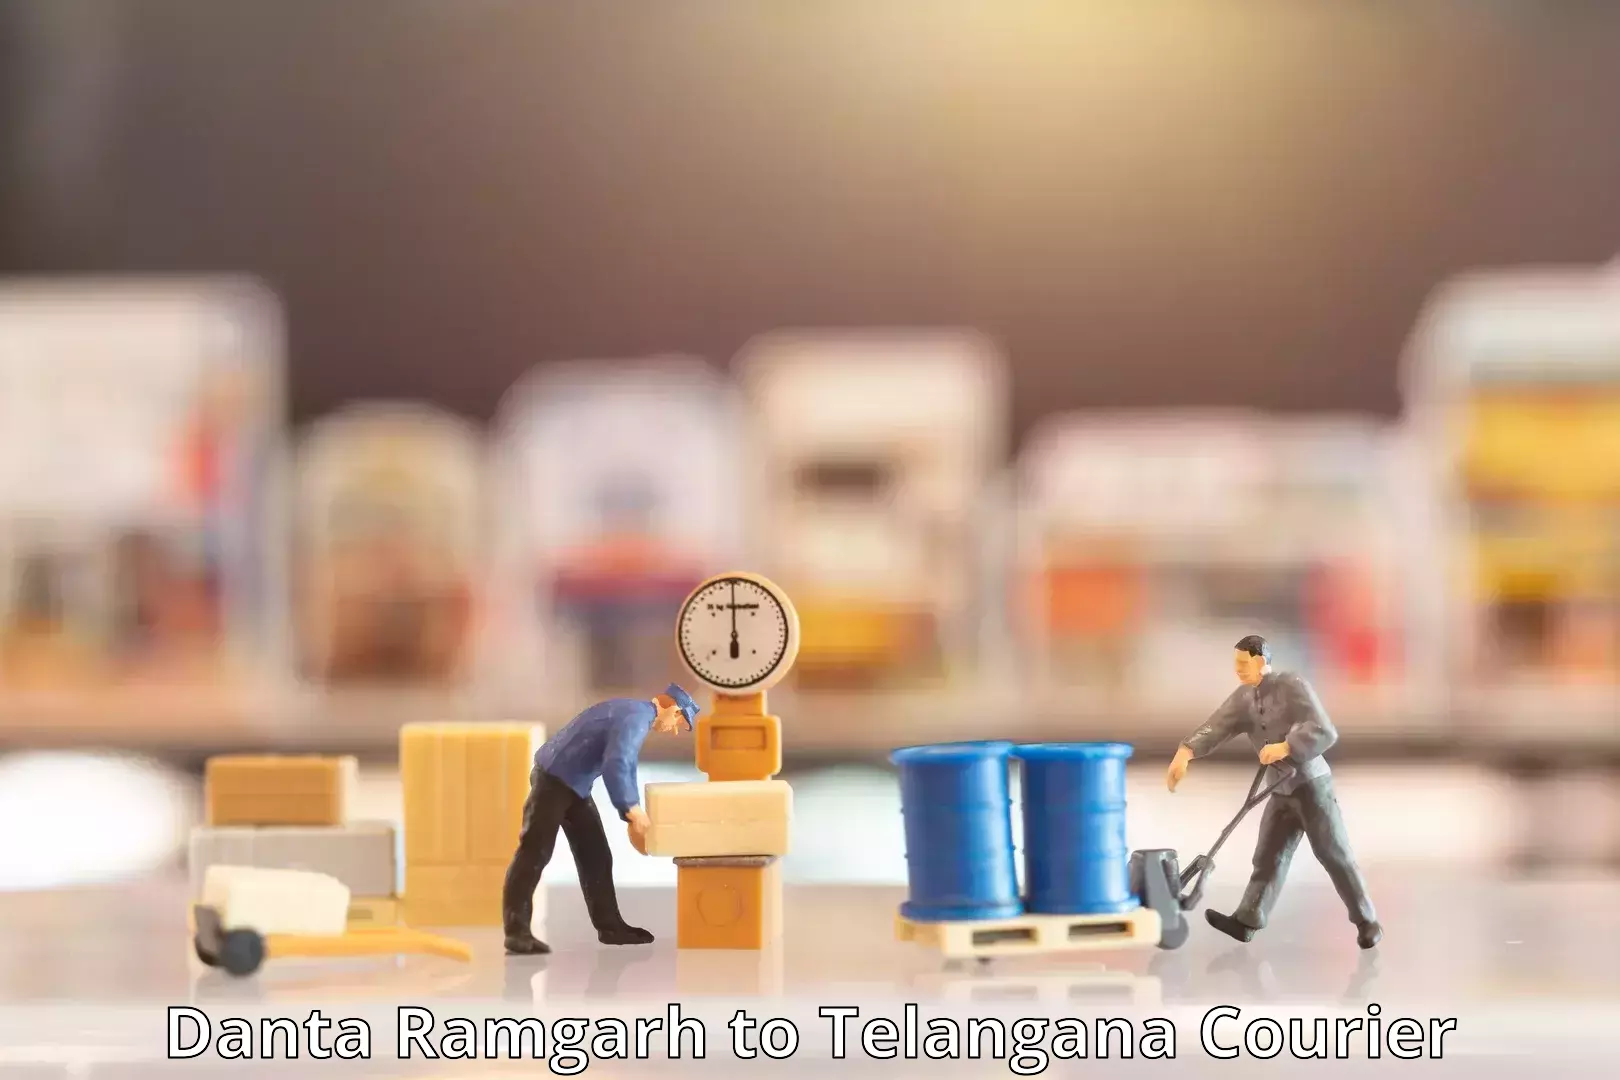 Nationwide parcel services Danta Ramgarh to Hyderabad